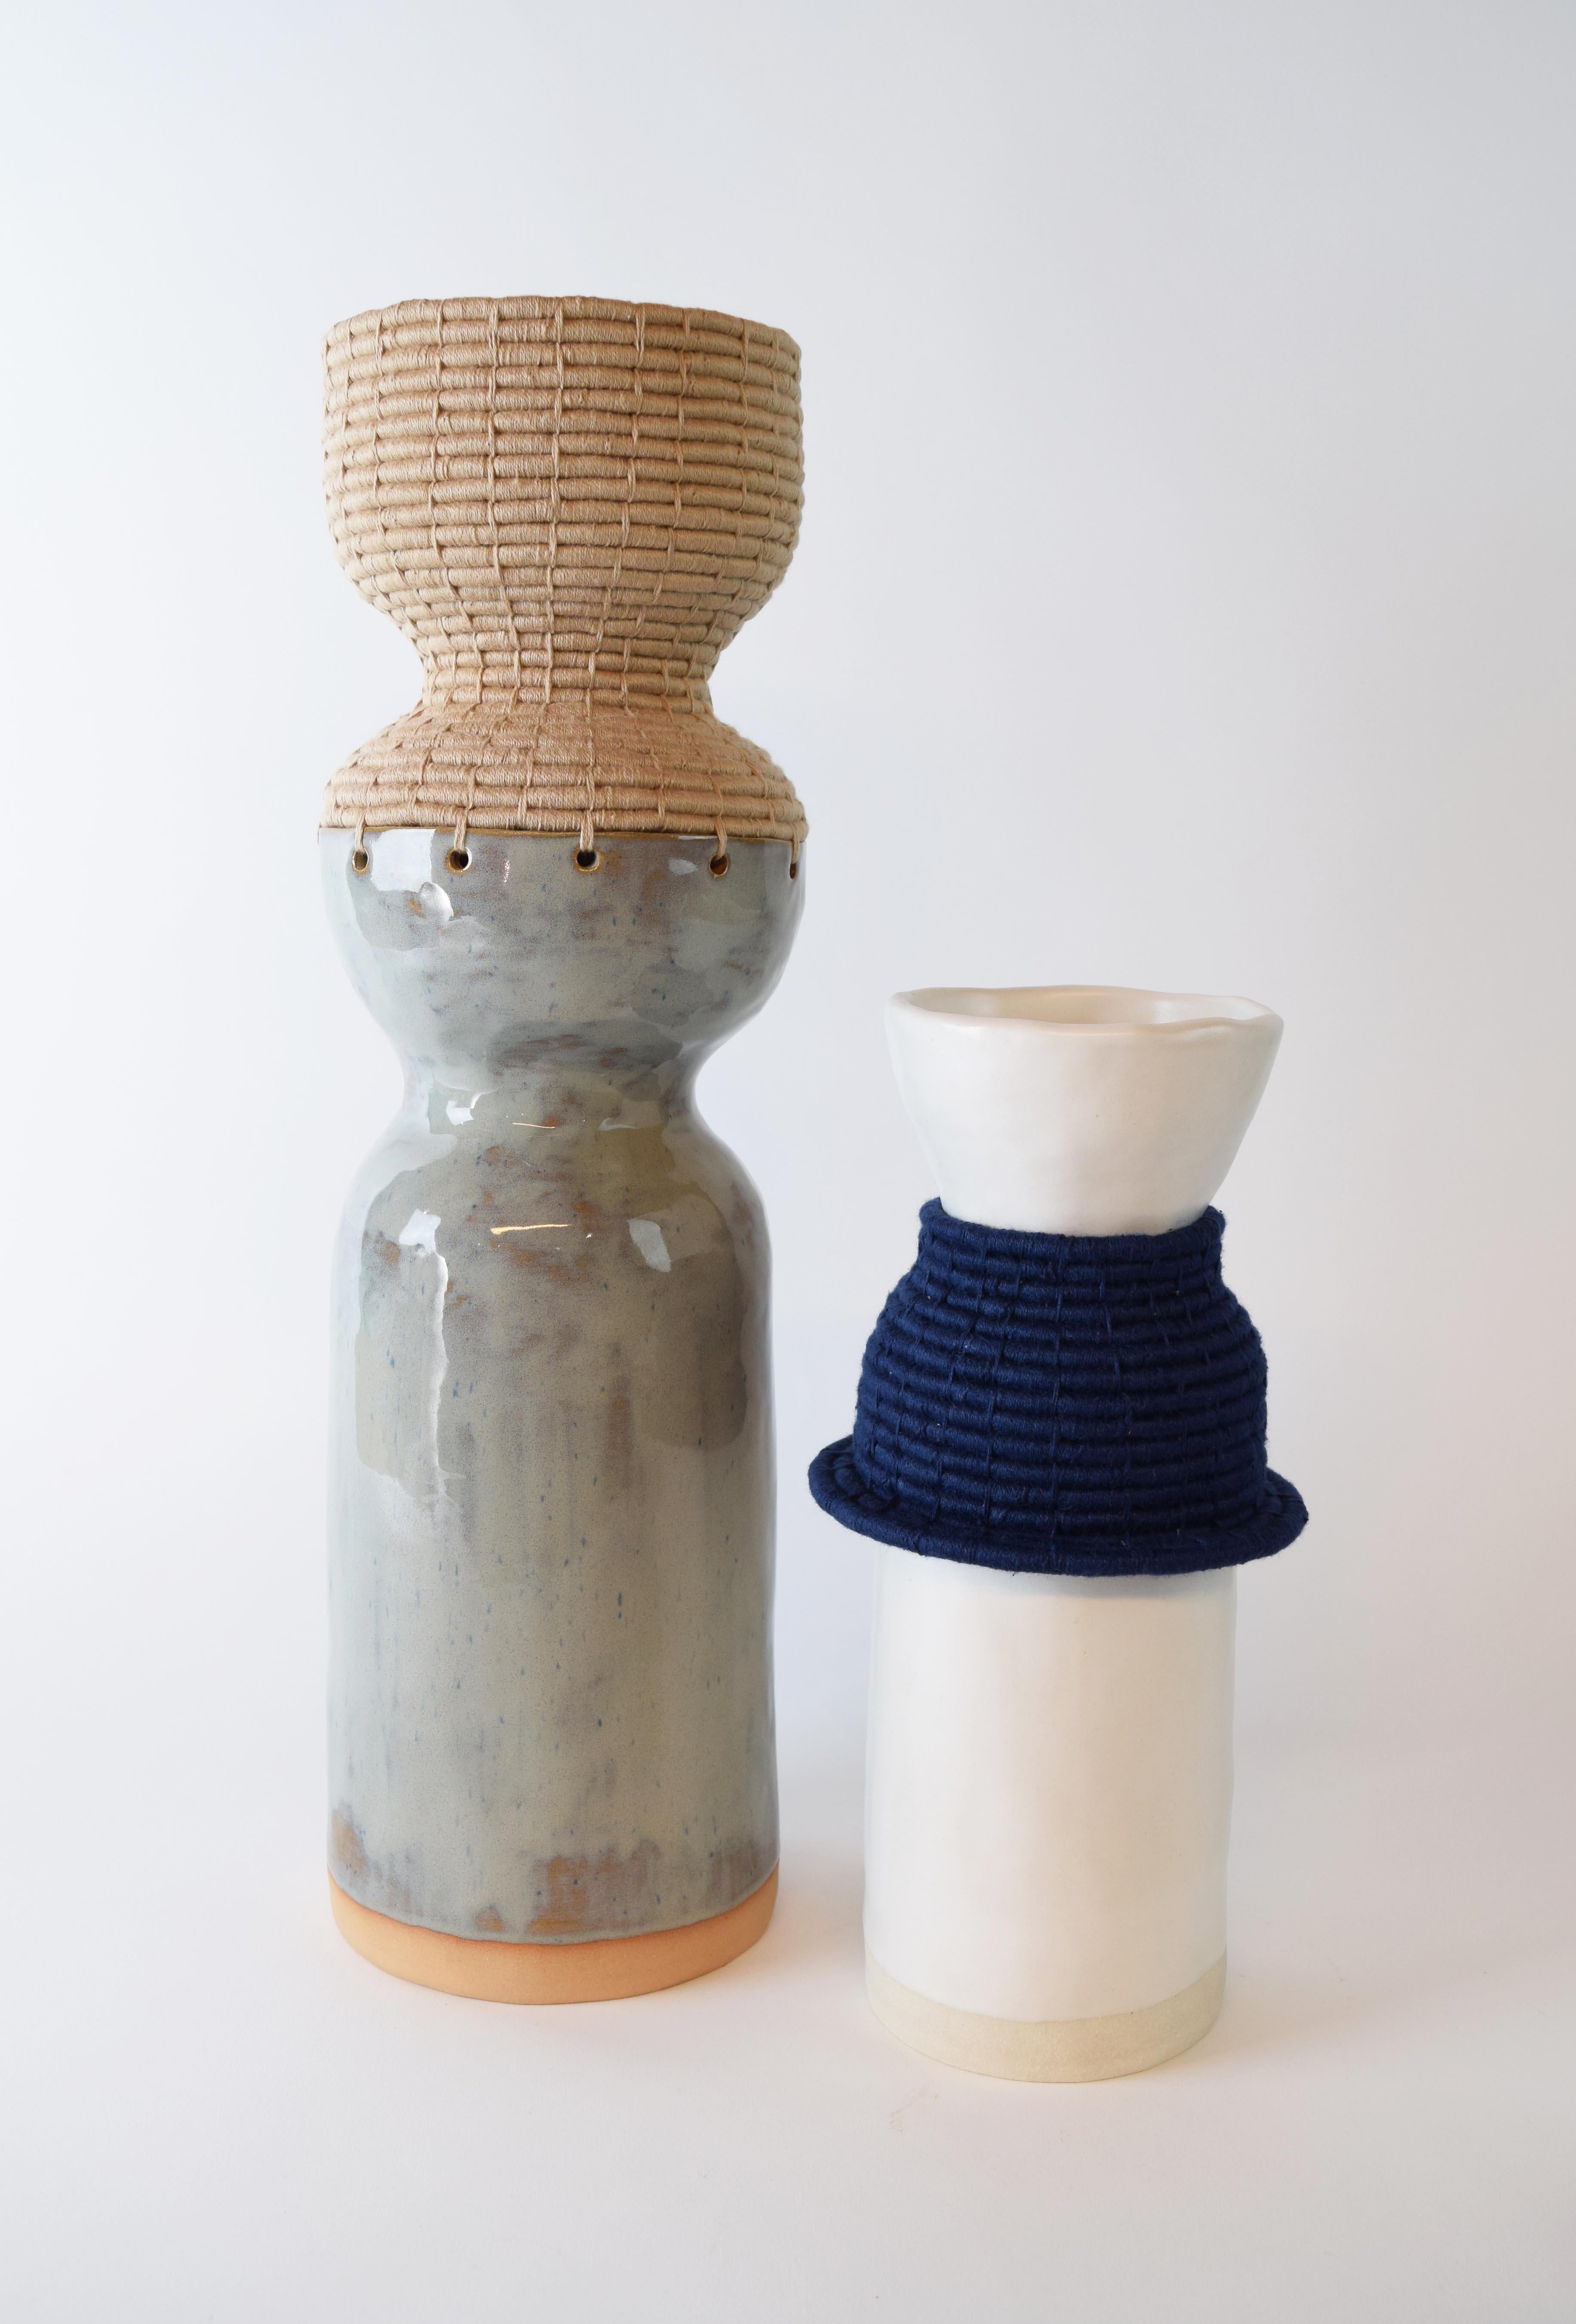 Contemporary One of a Kind Ceramic and Woven Cotton Vessel #753, Blue Glaze & Tan Weaving